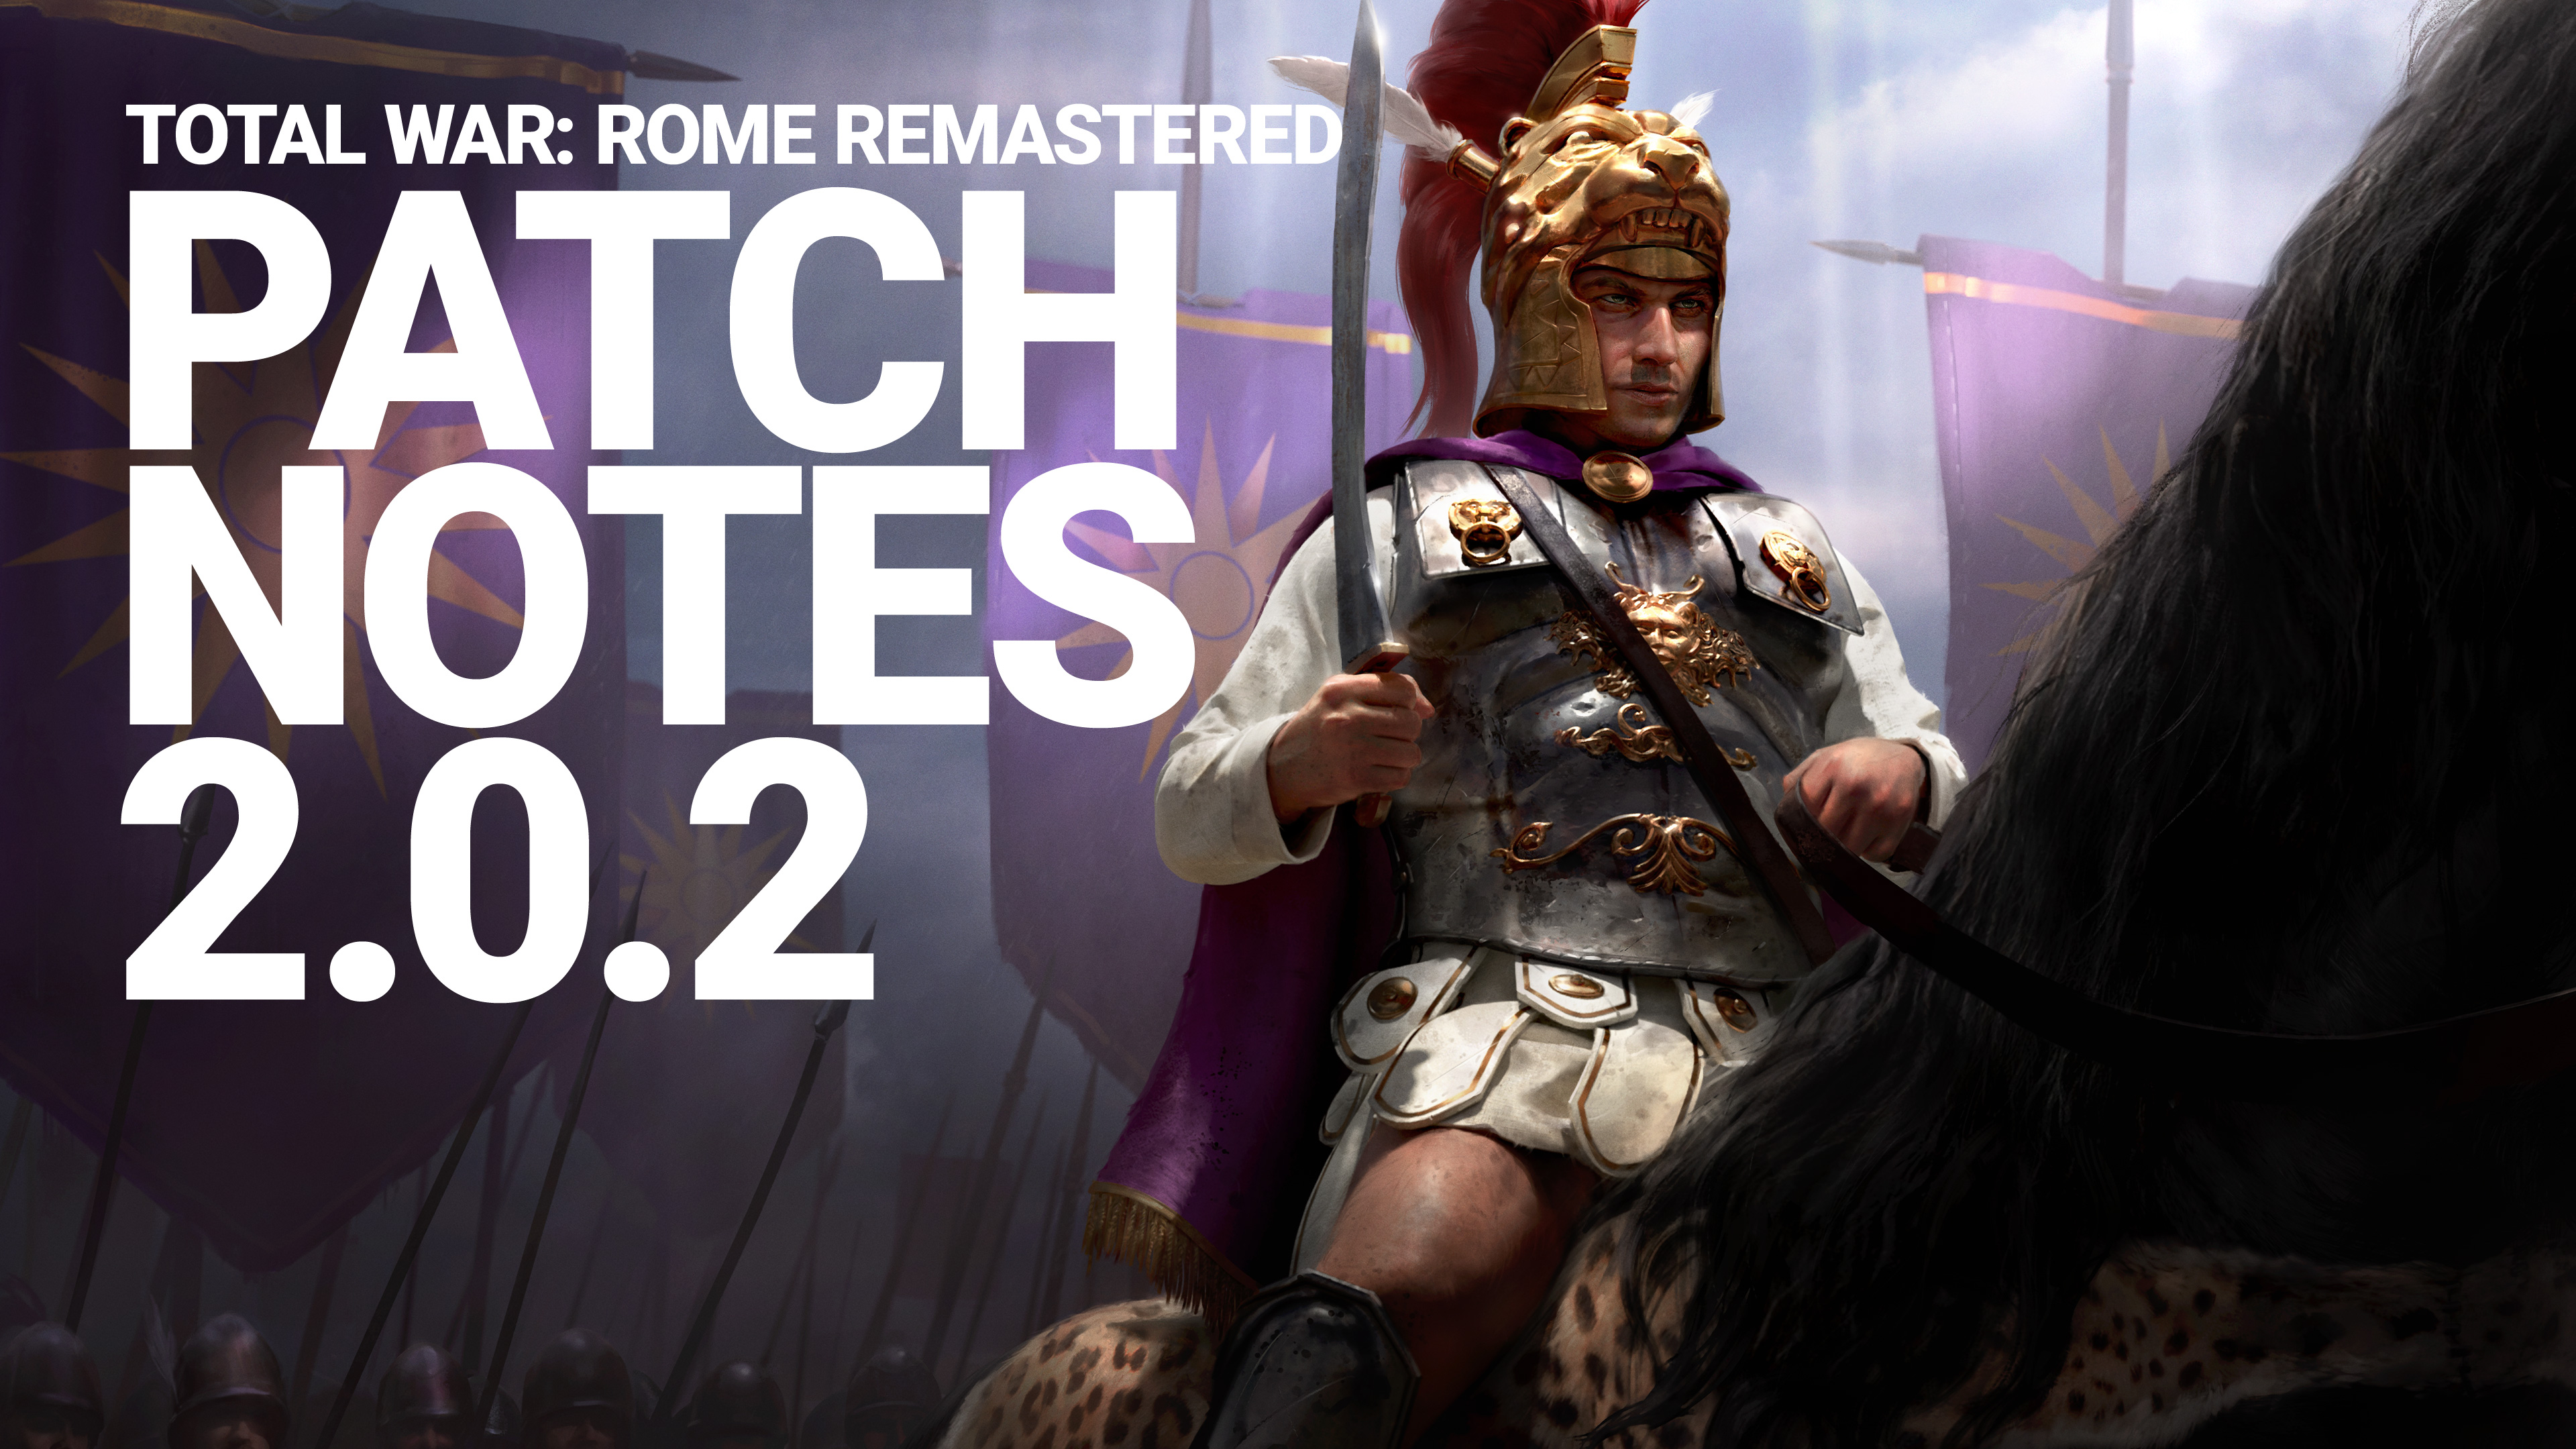 total war rome remastered wont launch